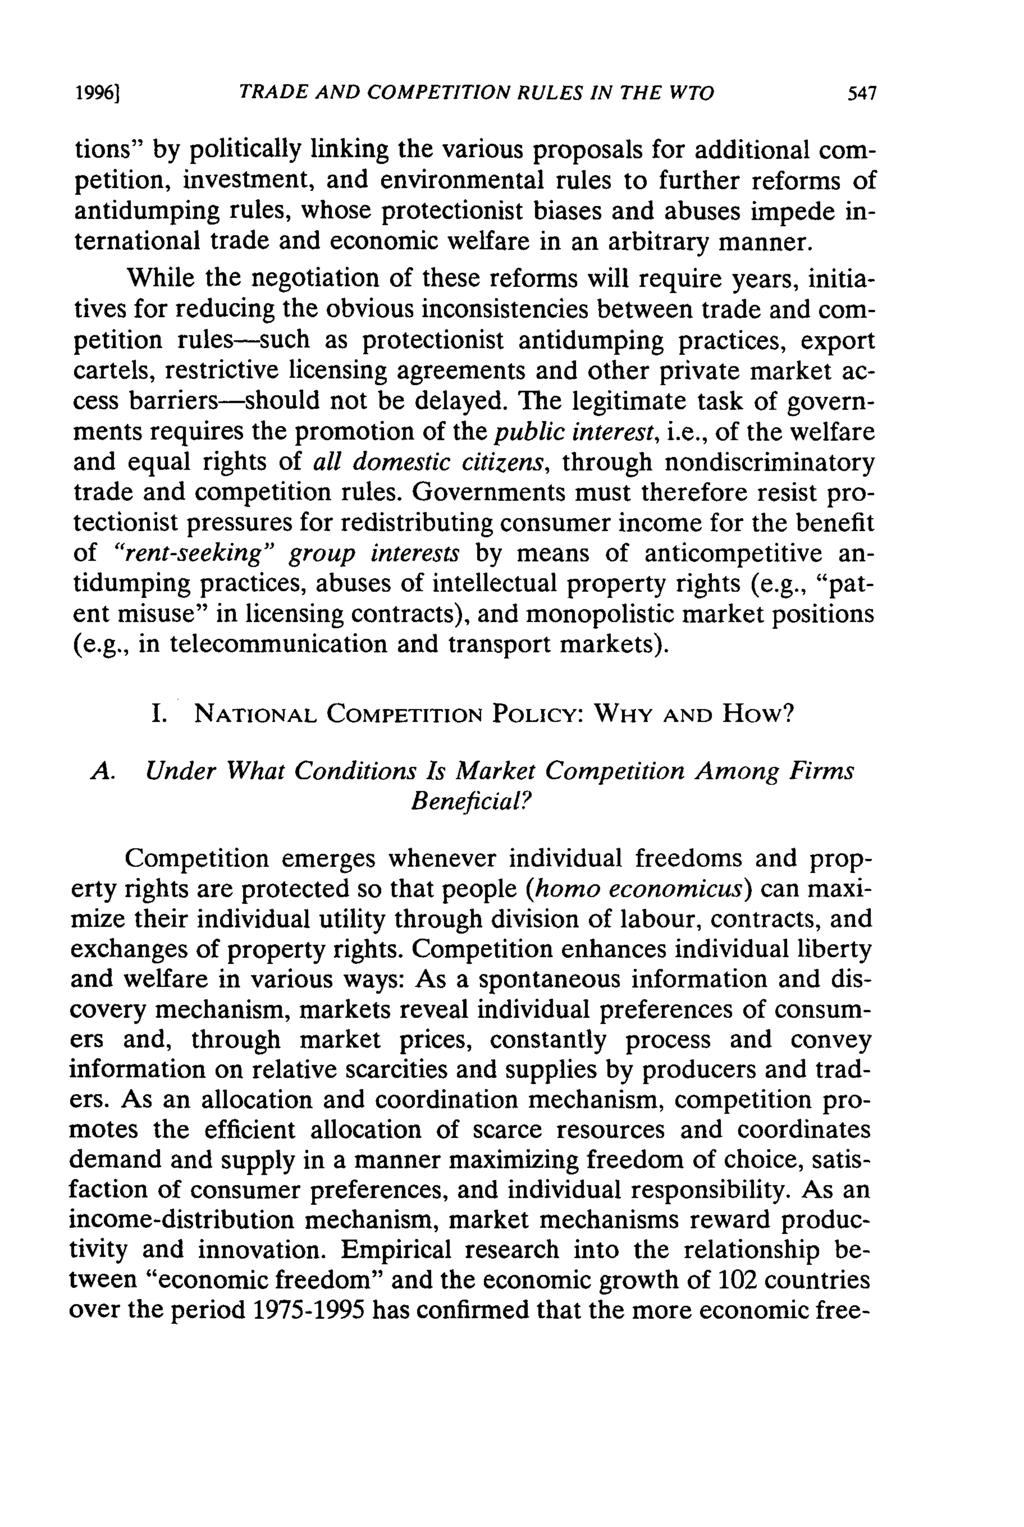 19961 TRADE AND COMPETITION RULES IN THE WTO tions" by politically linking the various proposals for additional competition, investment, and environmental rules to further reforms of antidumping